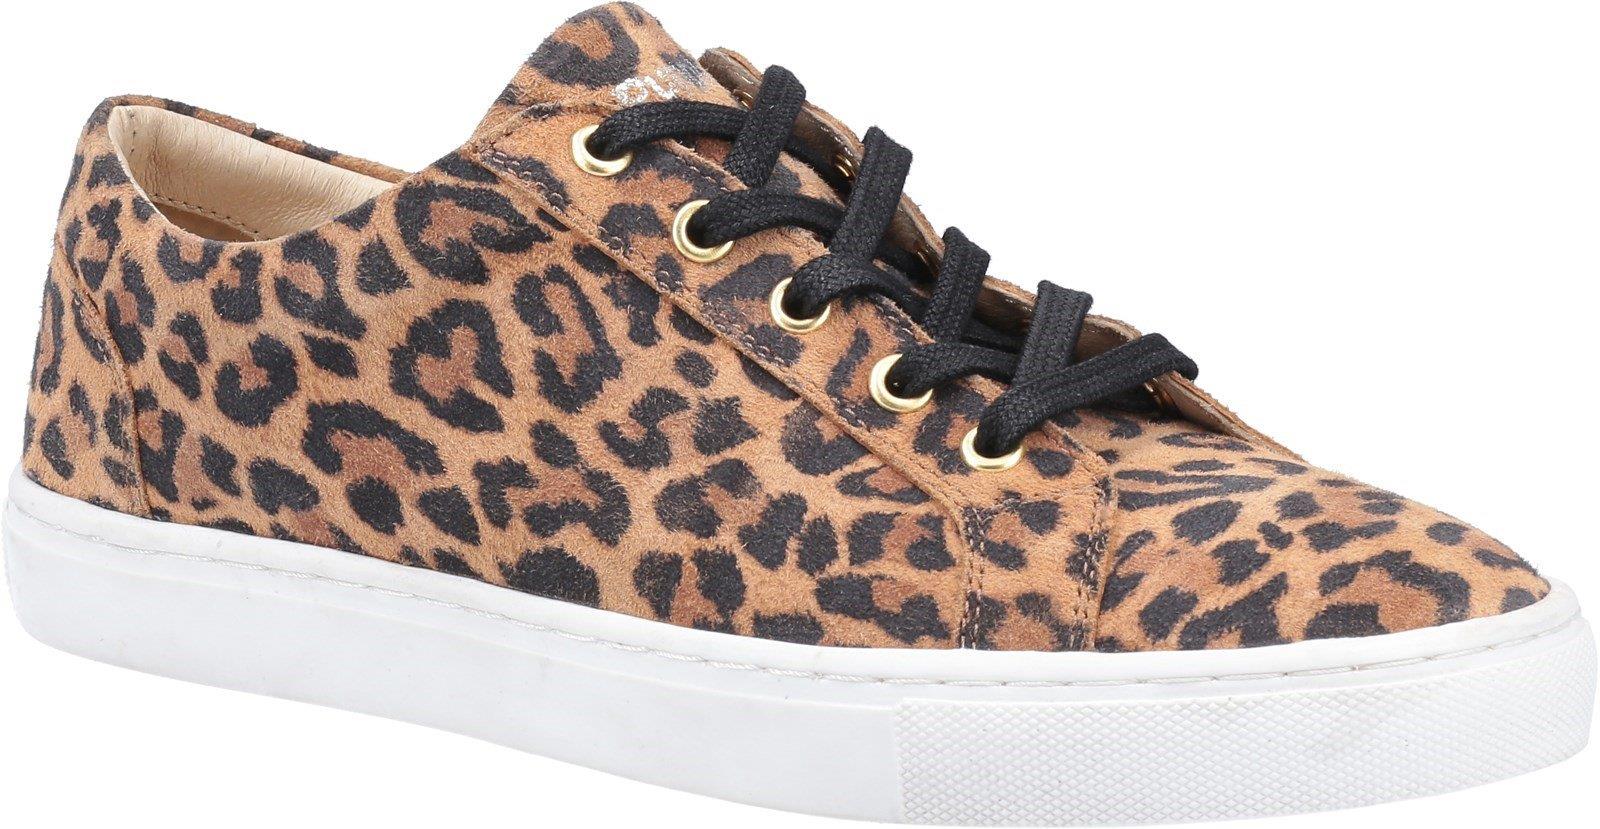 Hush Puppies Tessa leopard print leather ladies lace up sneakers trainers shoes